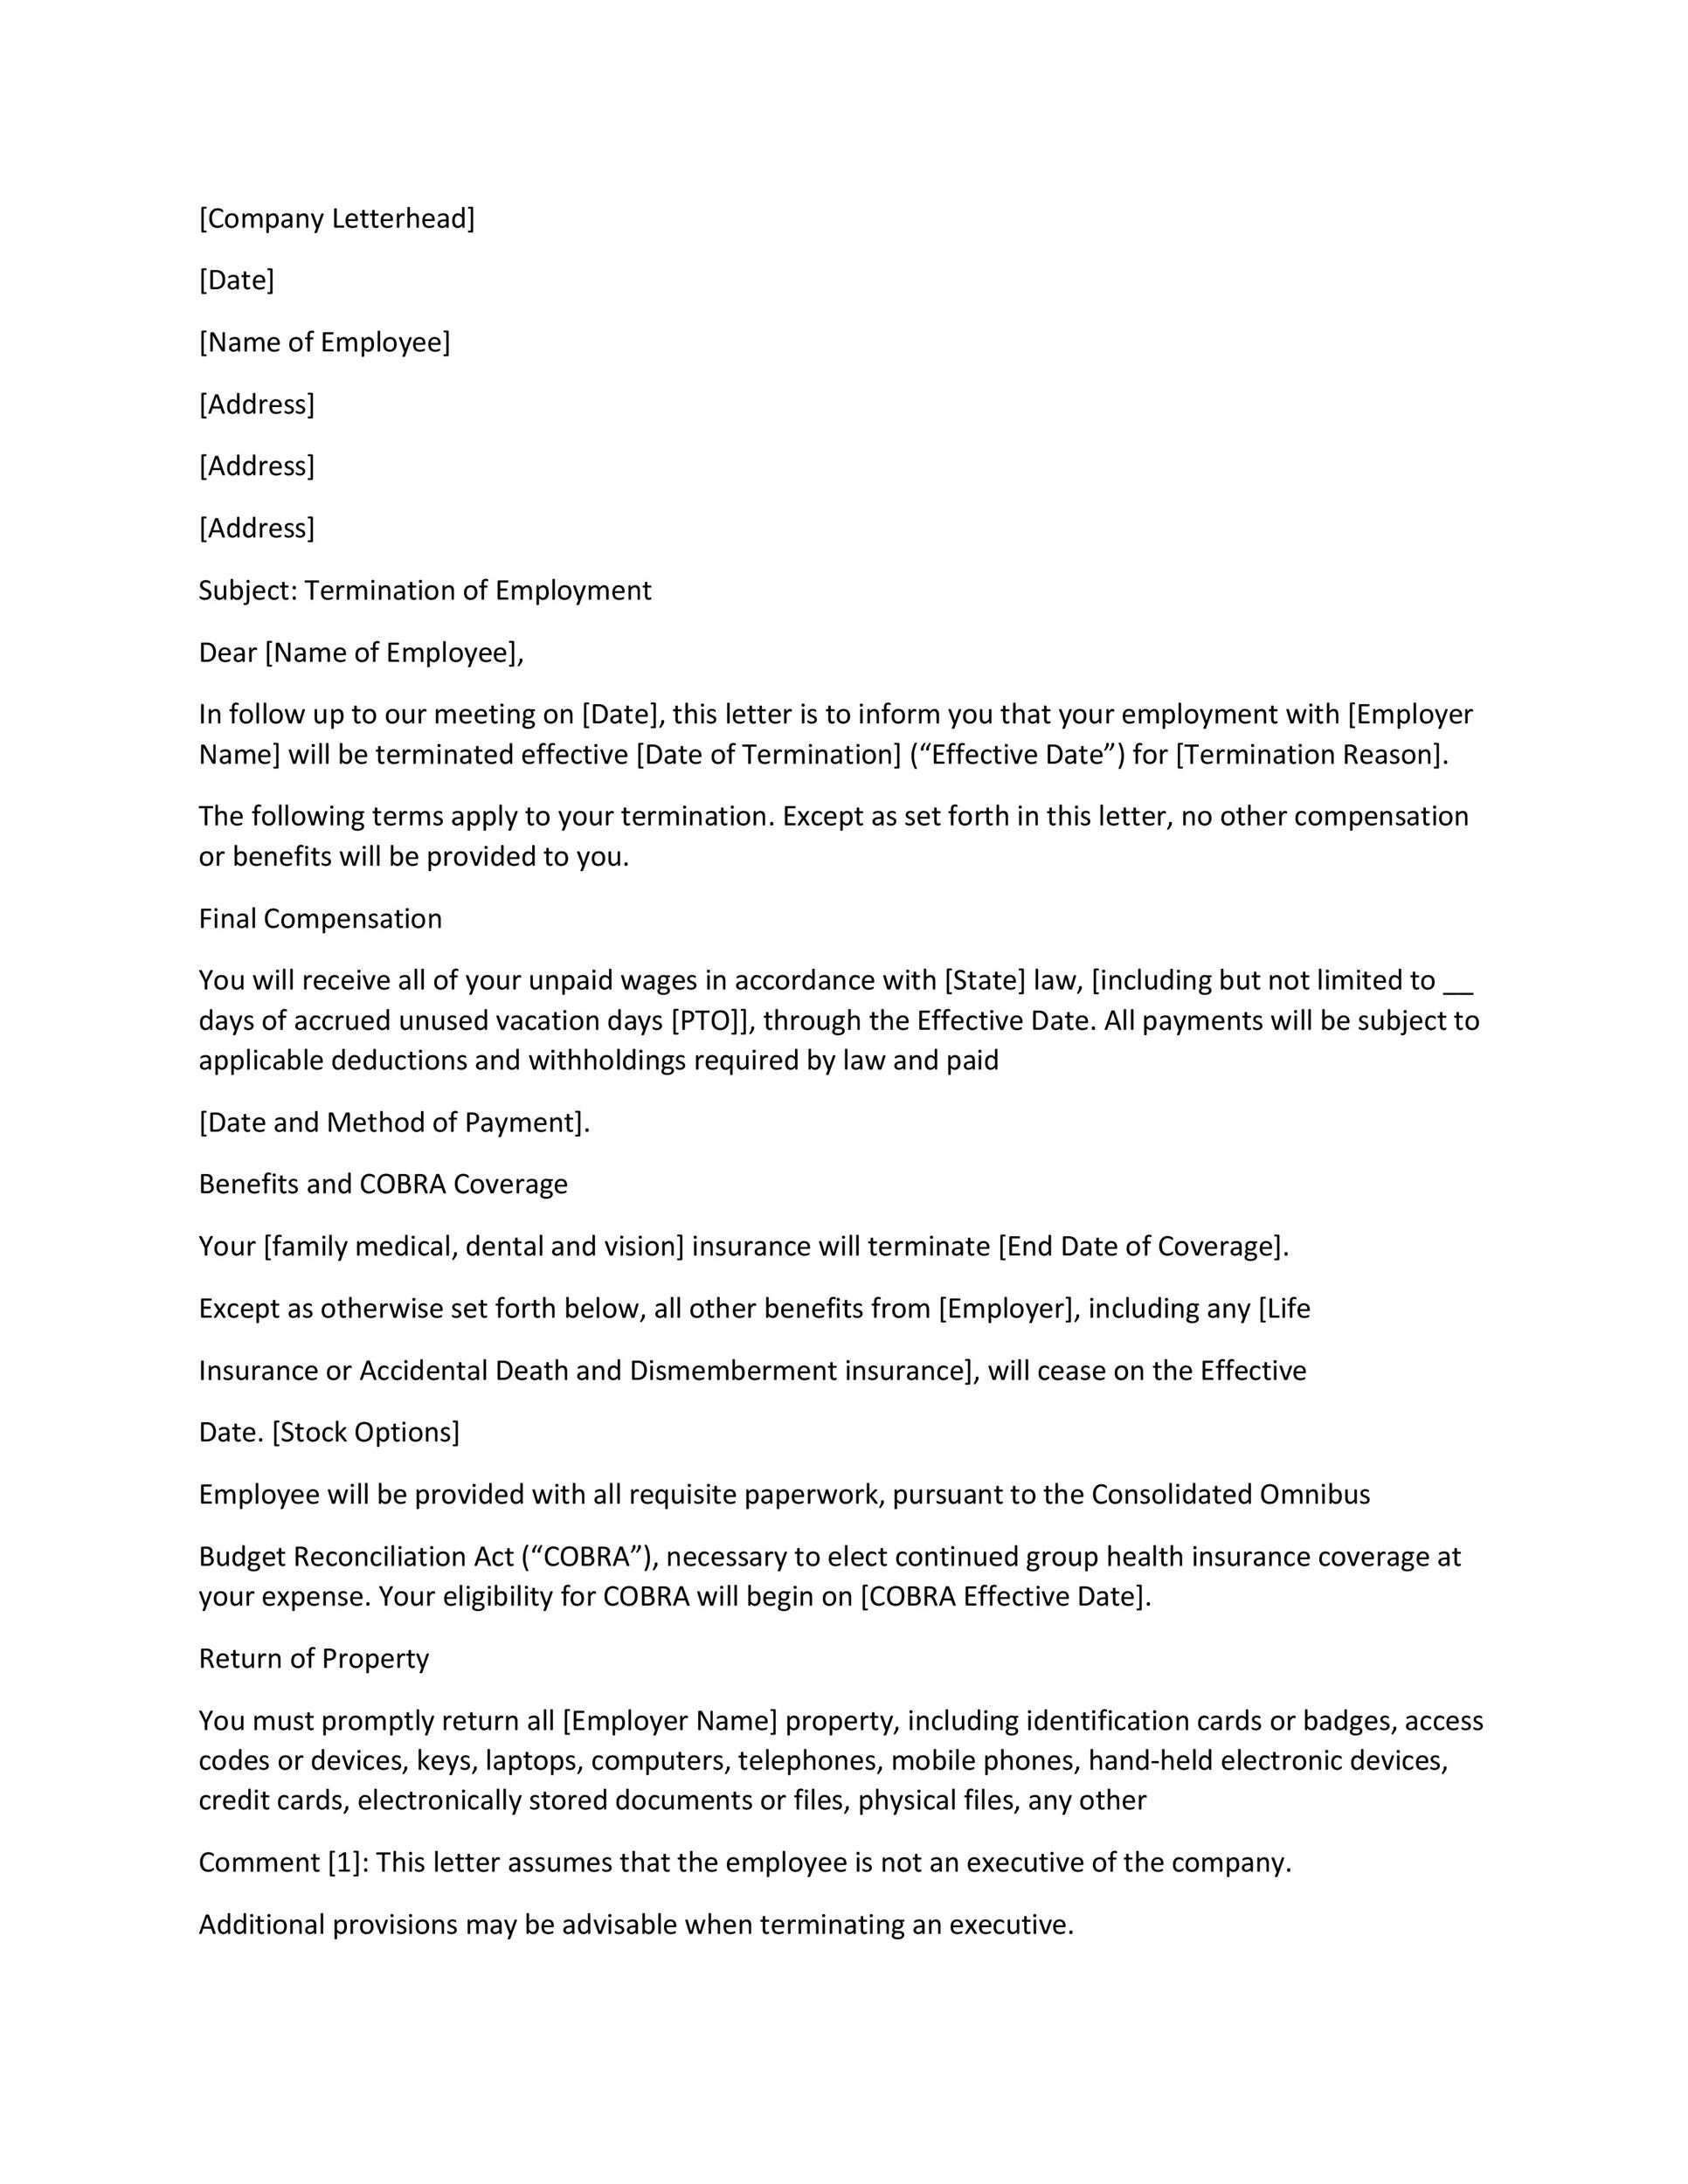 Employment Termination Letter Pdf from templatelab.com